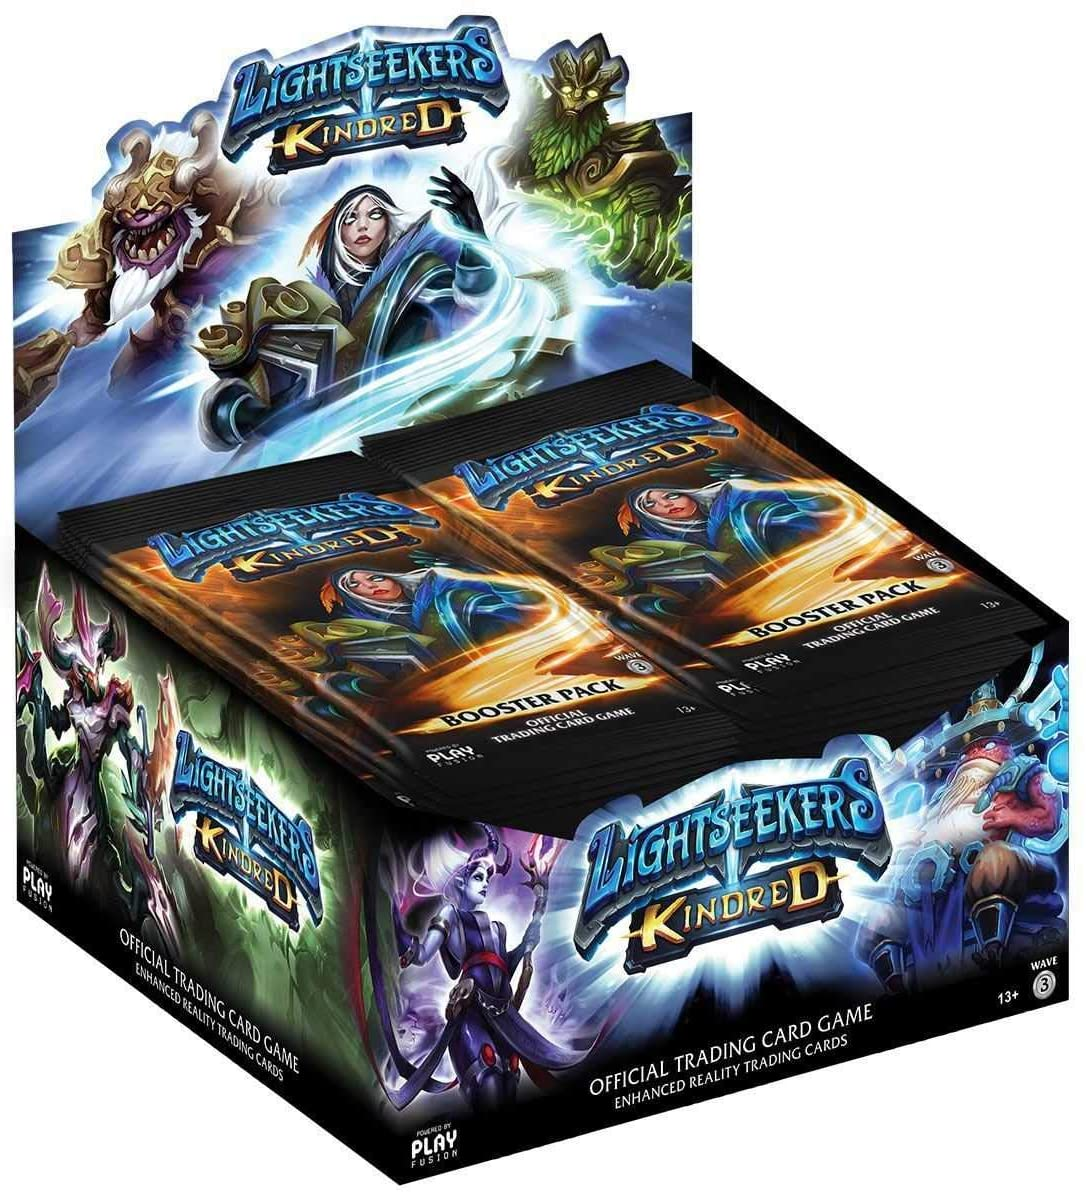 Lightseekers Kindred Booster Box